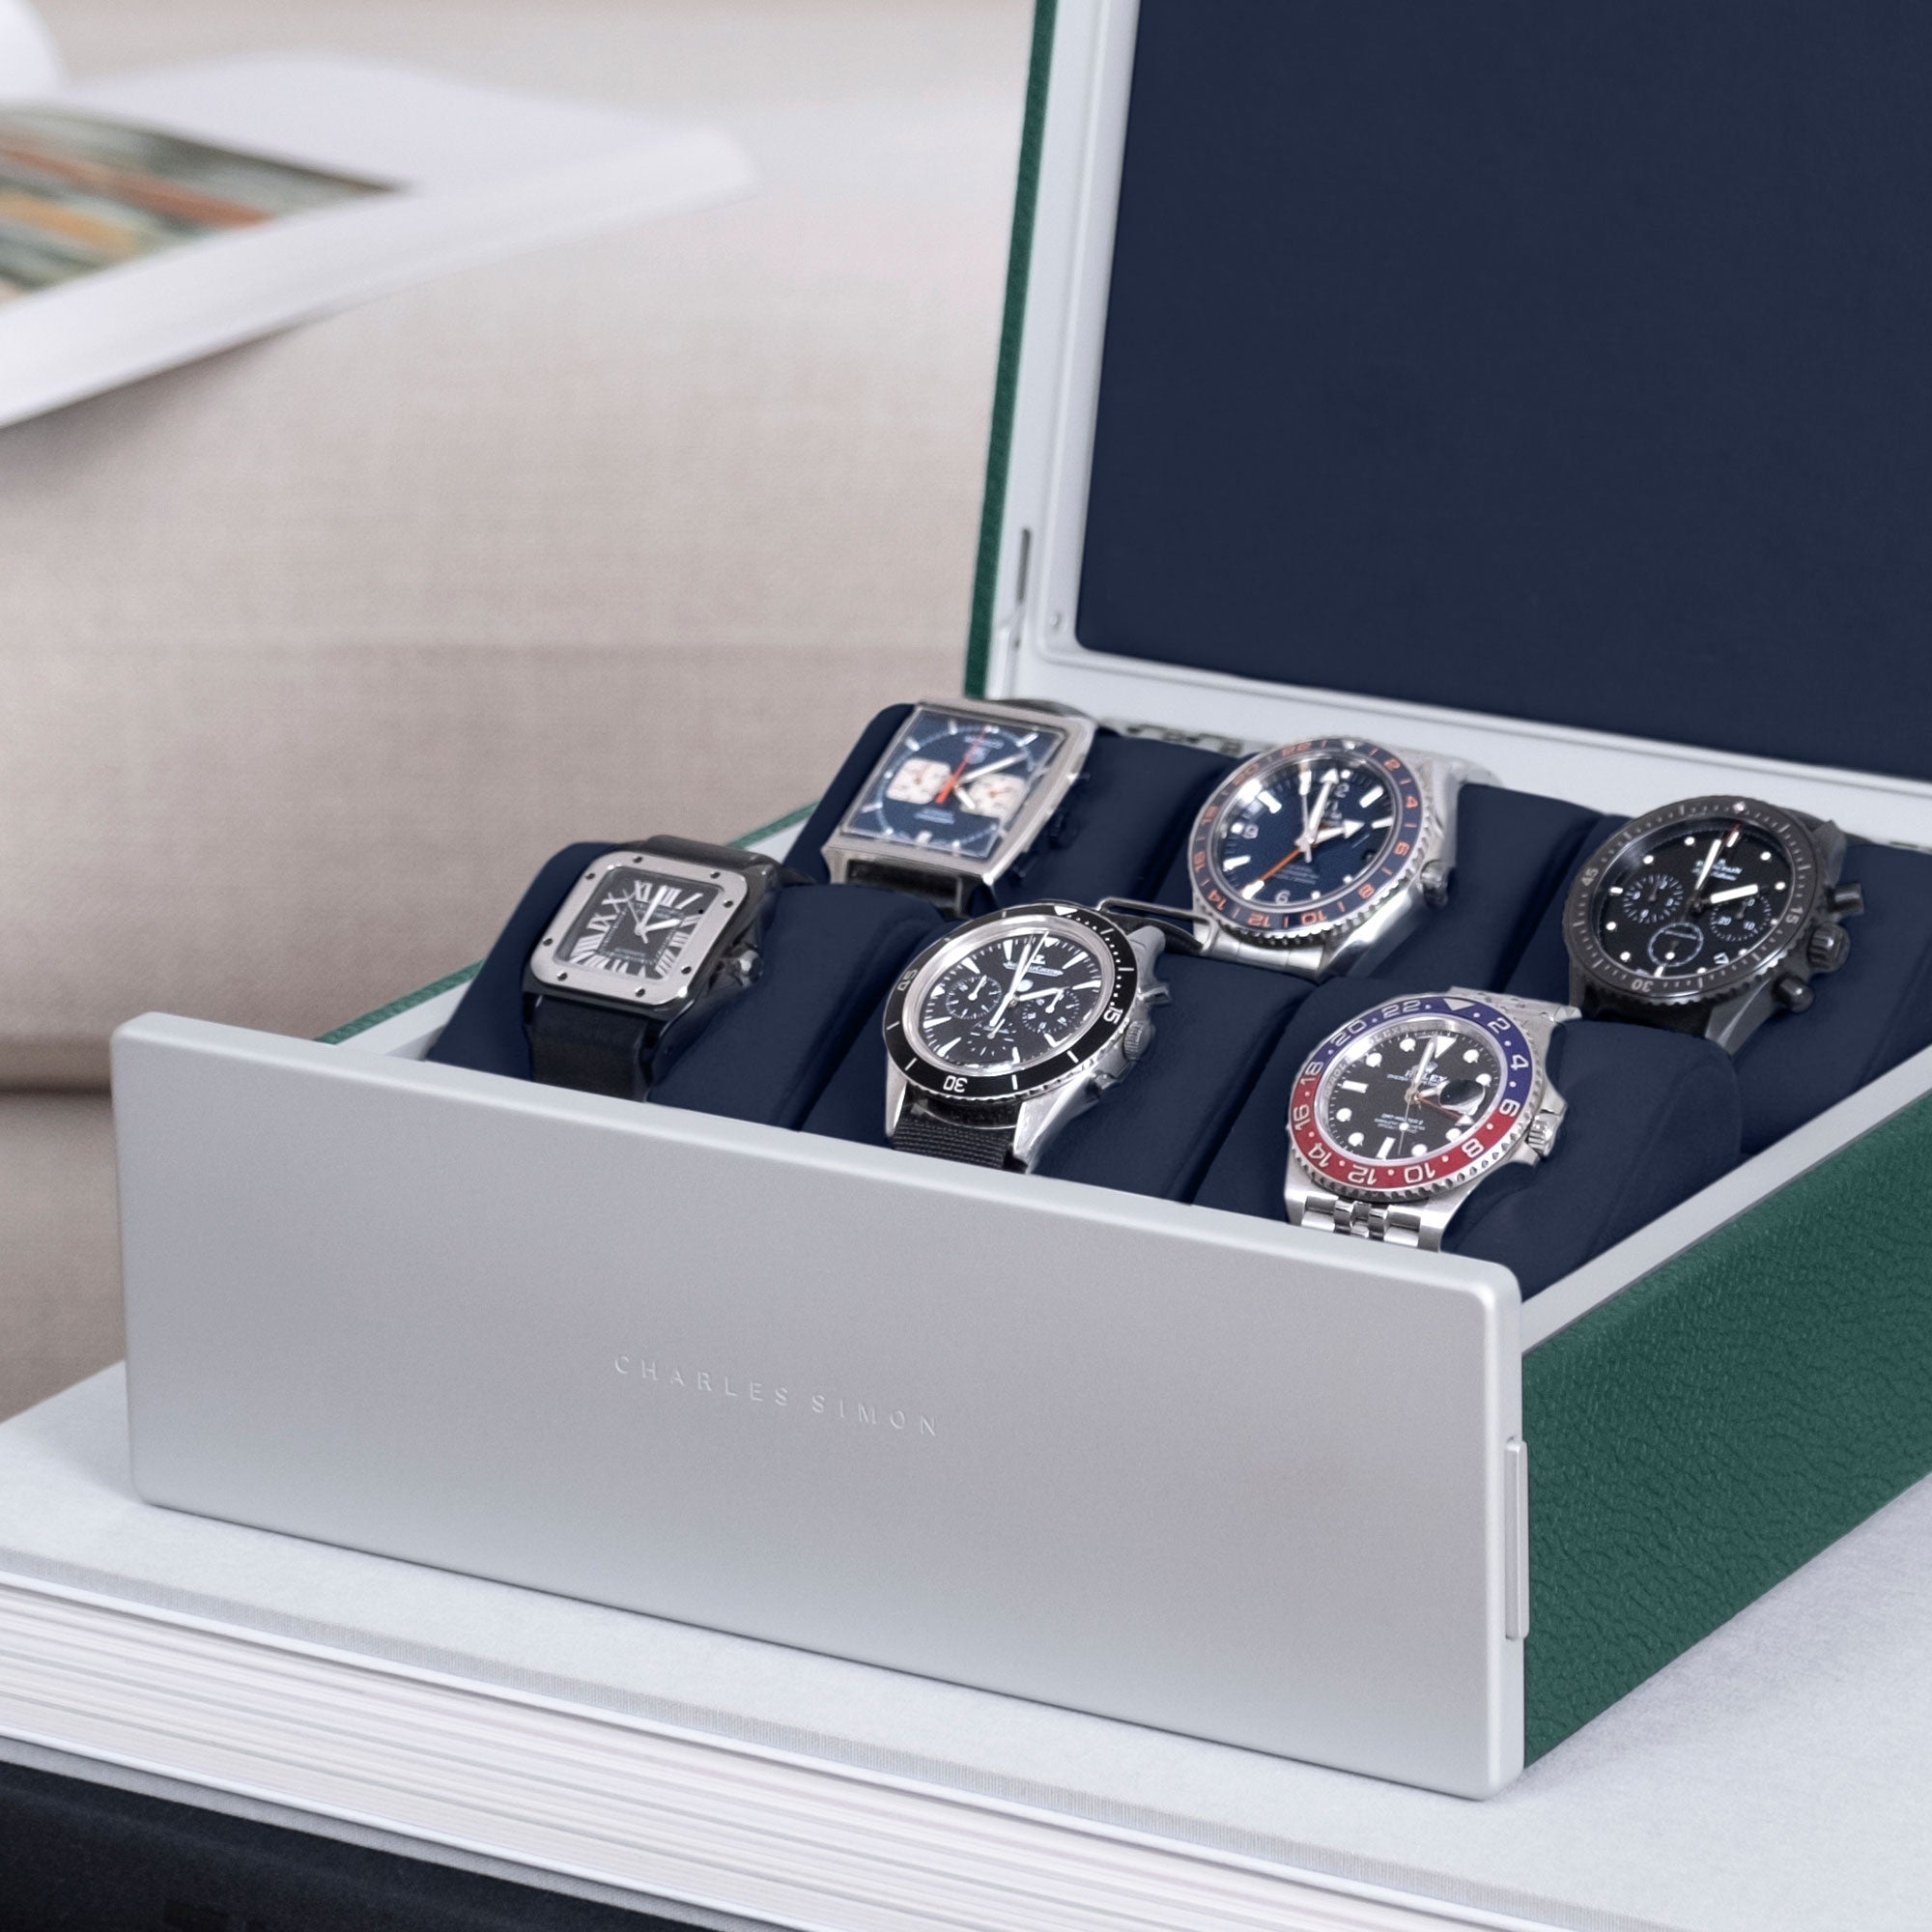 Detail photo of watch collection of six watches, including Cartier, Rolex, Tagheuer, Omega and Jaeger LeCoultre showcased in Spence 6 watch box in emerald leather and deep blue interior